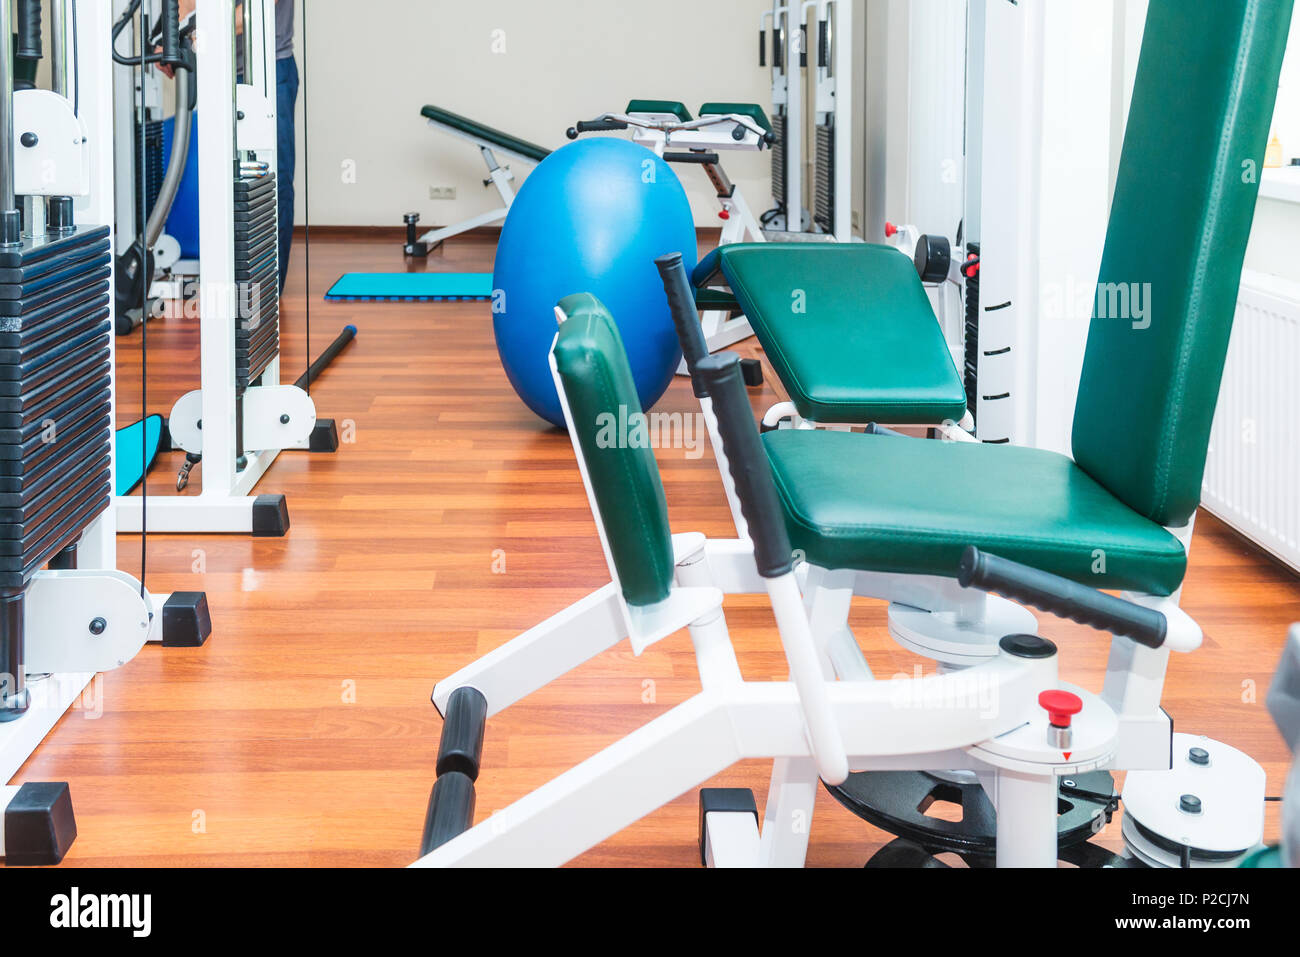 https://c8.alamy.com/comp/P2CJ7N/close-up-equipment-for-rehabilitation-in-interior-of-physiotherapy-clinic-physical-therapy-center-selective-focus-copy-space-P2CJ7N.jpg